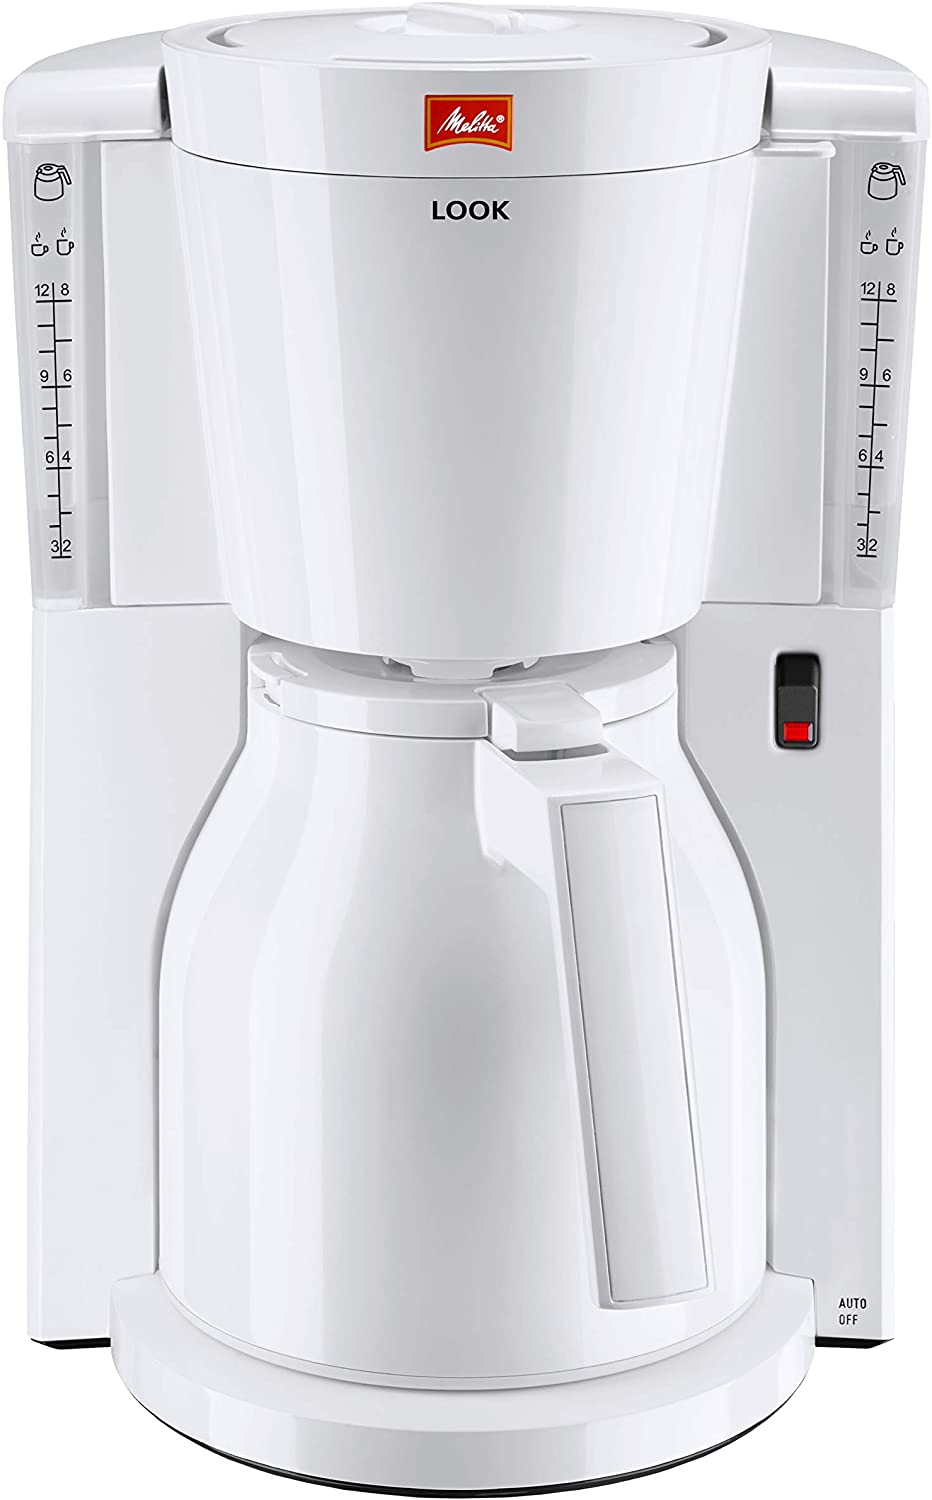 Melitta 1011-09 Look IV Therm Coffee Filter Machine, White